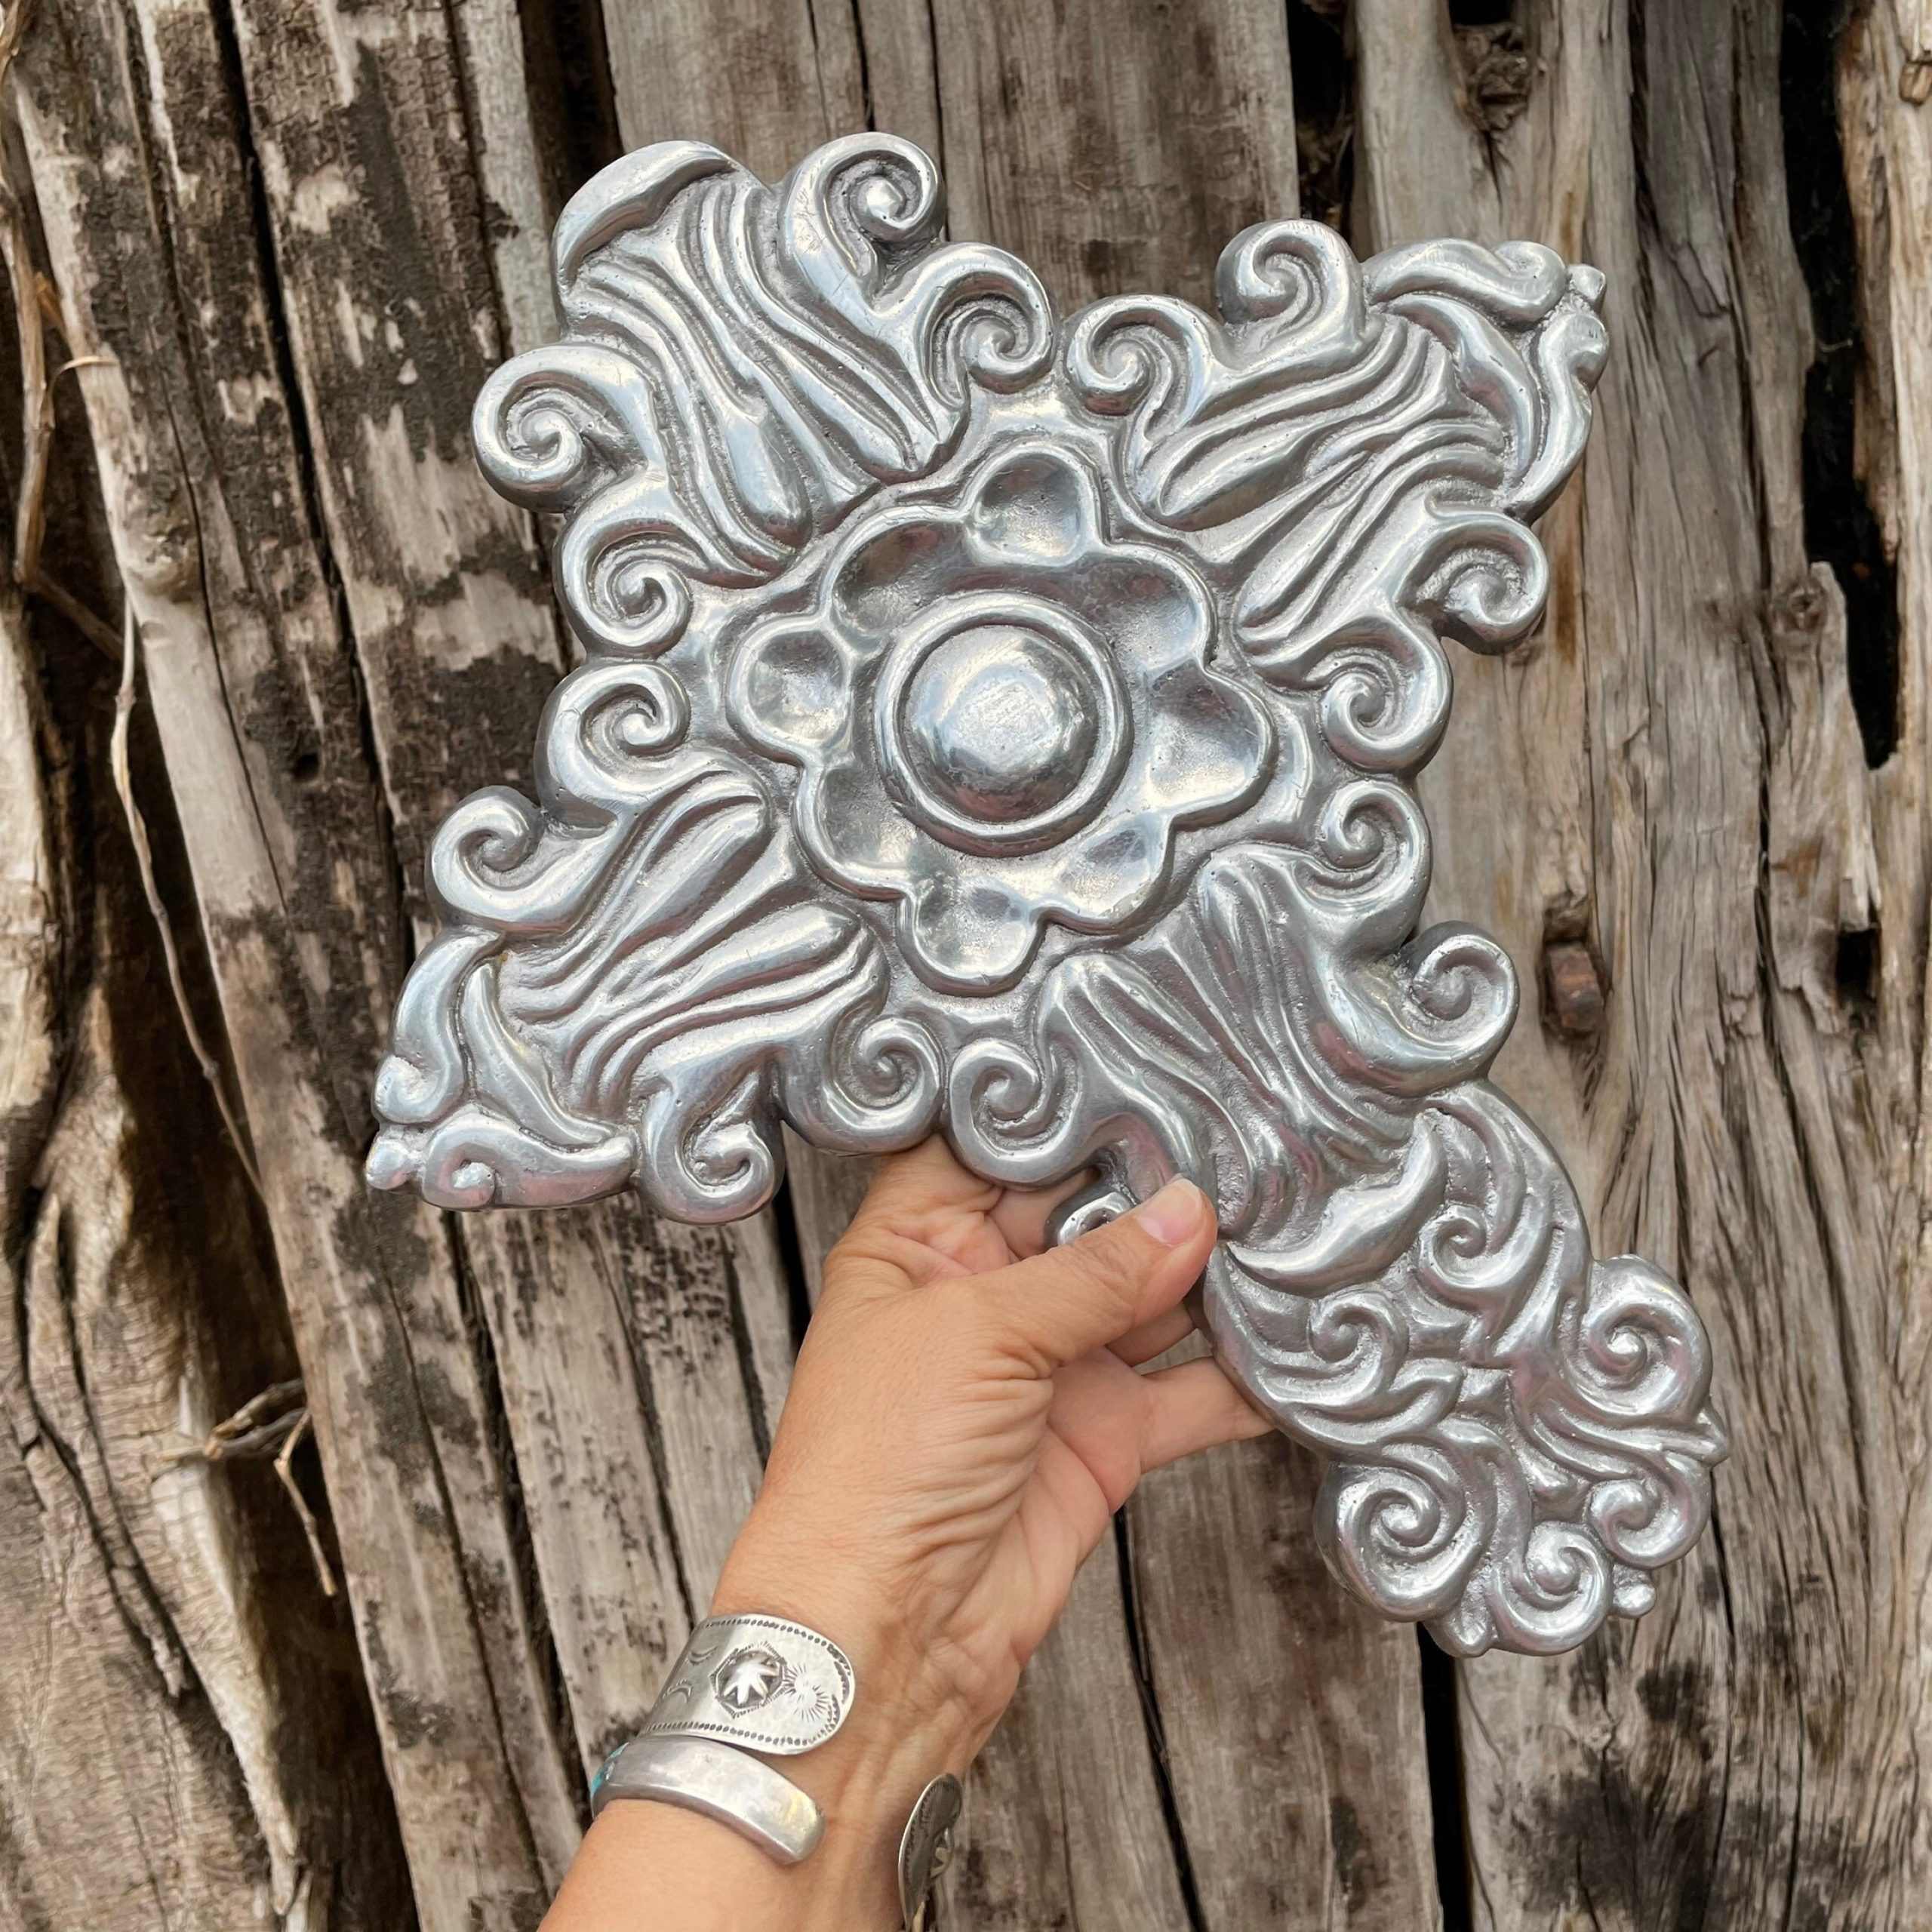 Large Mexican Wall Cross Pewter Metal Cross Wall Hanging Spanish Decor Within Pewter Metal Wall Art (View 5 of 15)